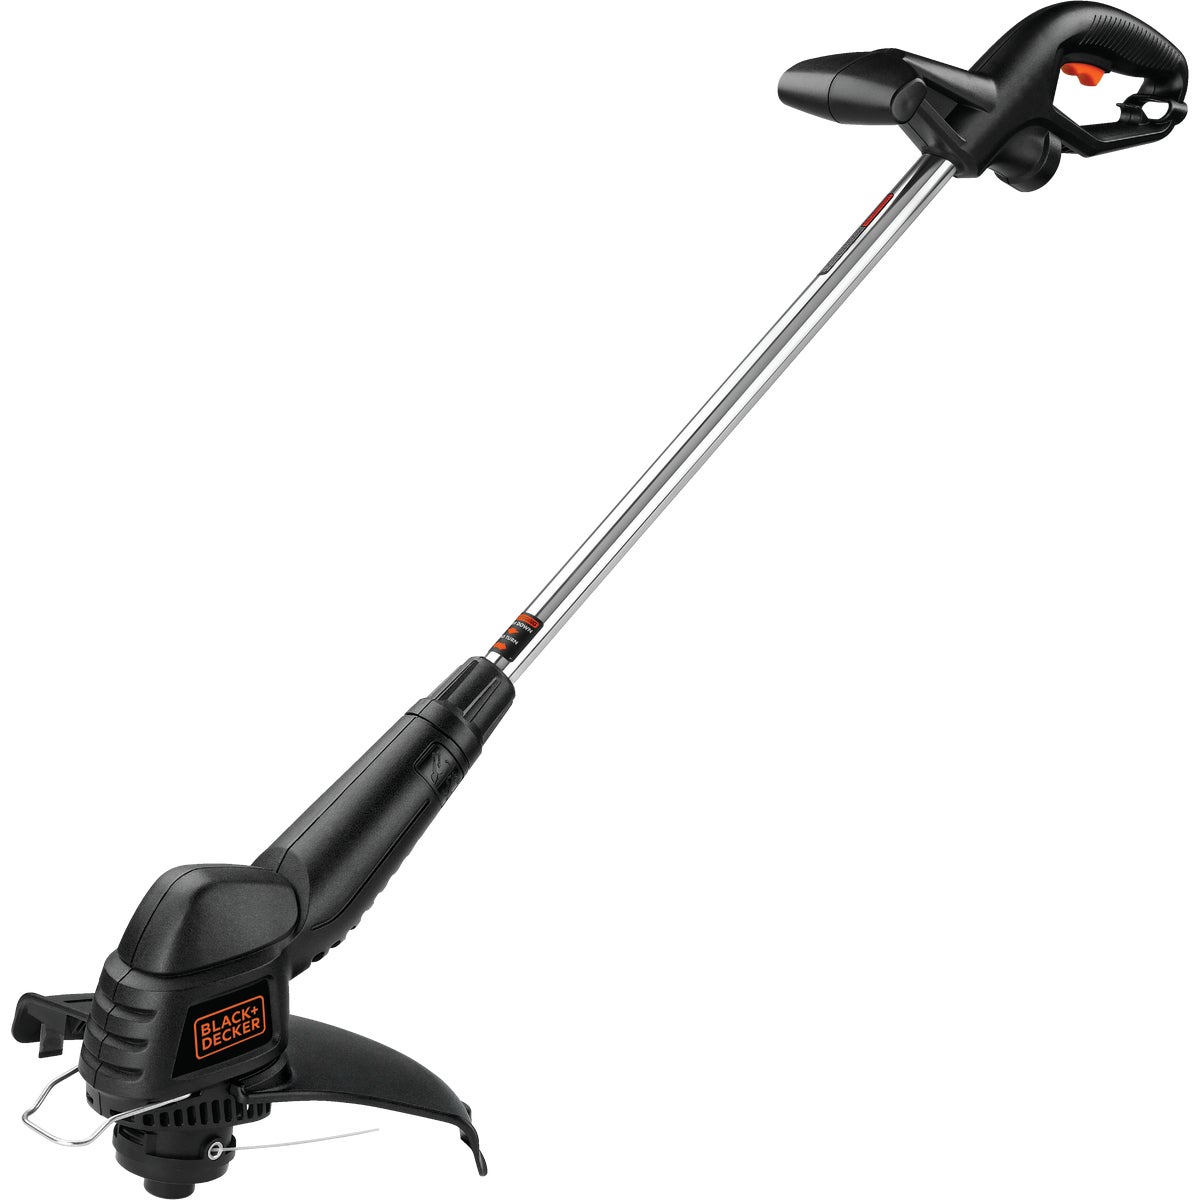 Item 750789, 12 In. trimmer/edger. Powerful 3.